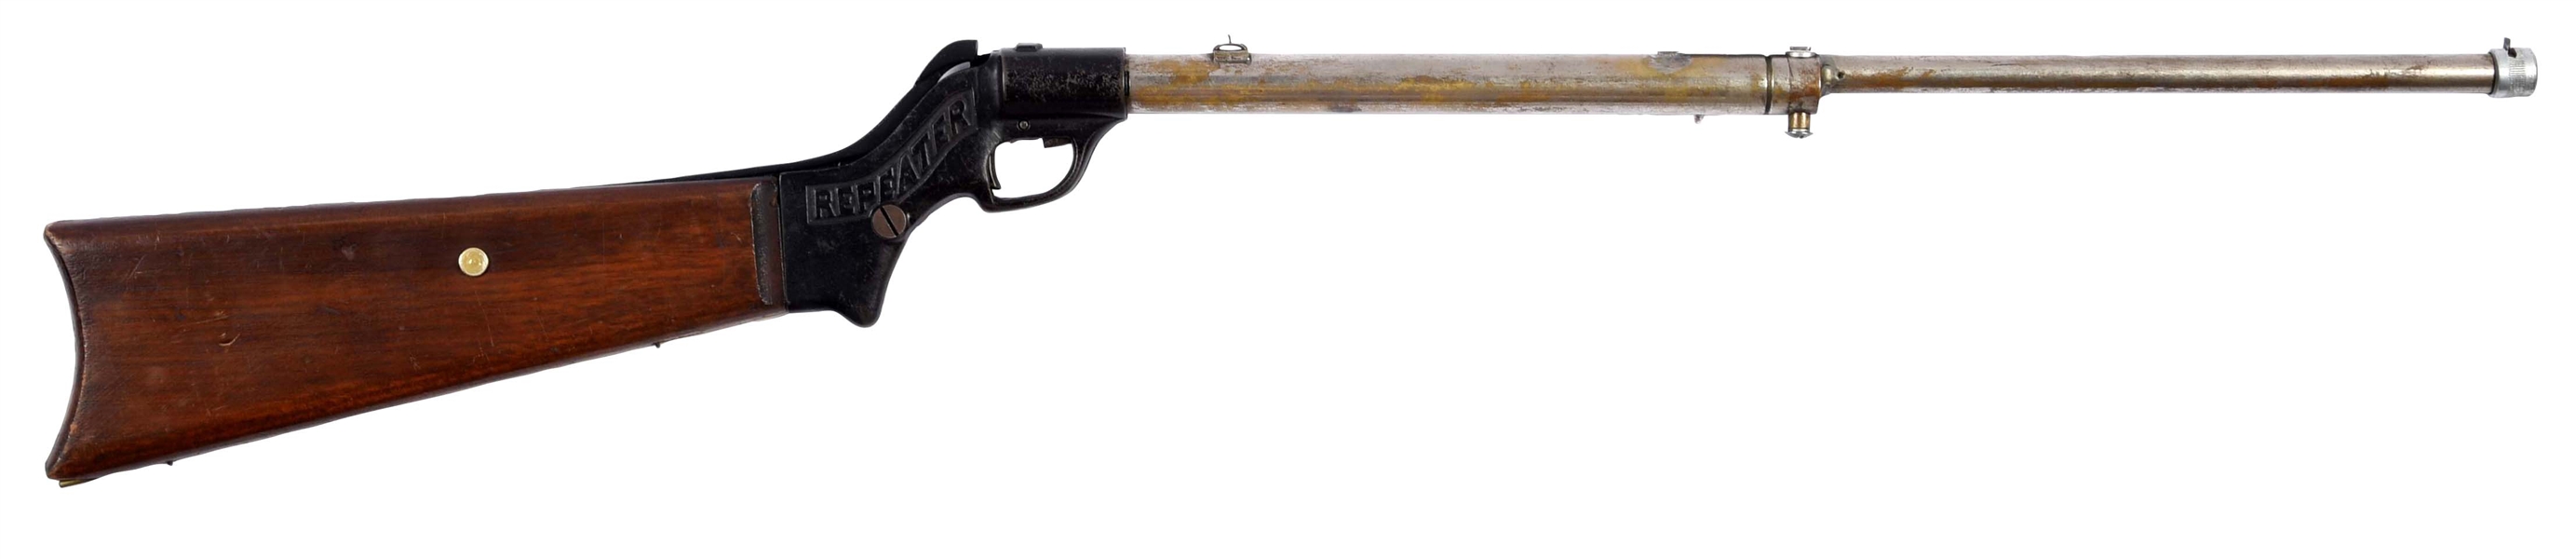 MATCHLESS AIR RIFLE BY HENRY C. HART.